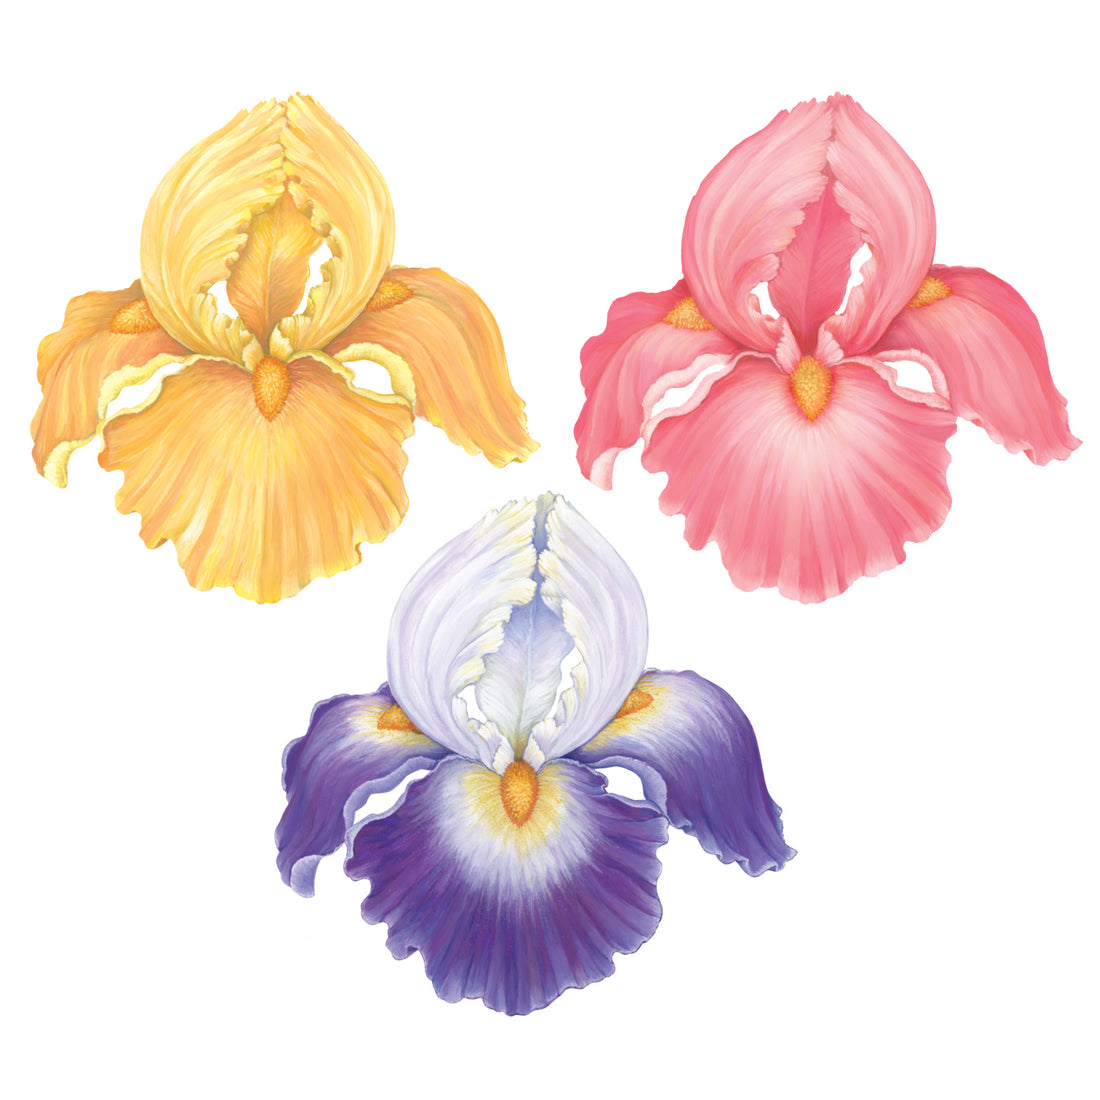 Three die-cut illustrated iris blooms: one in bright yellow, one in soft pink, and one in deep purple and white.